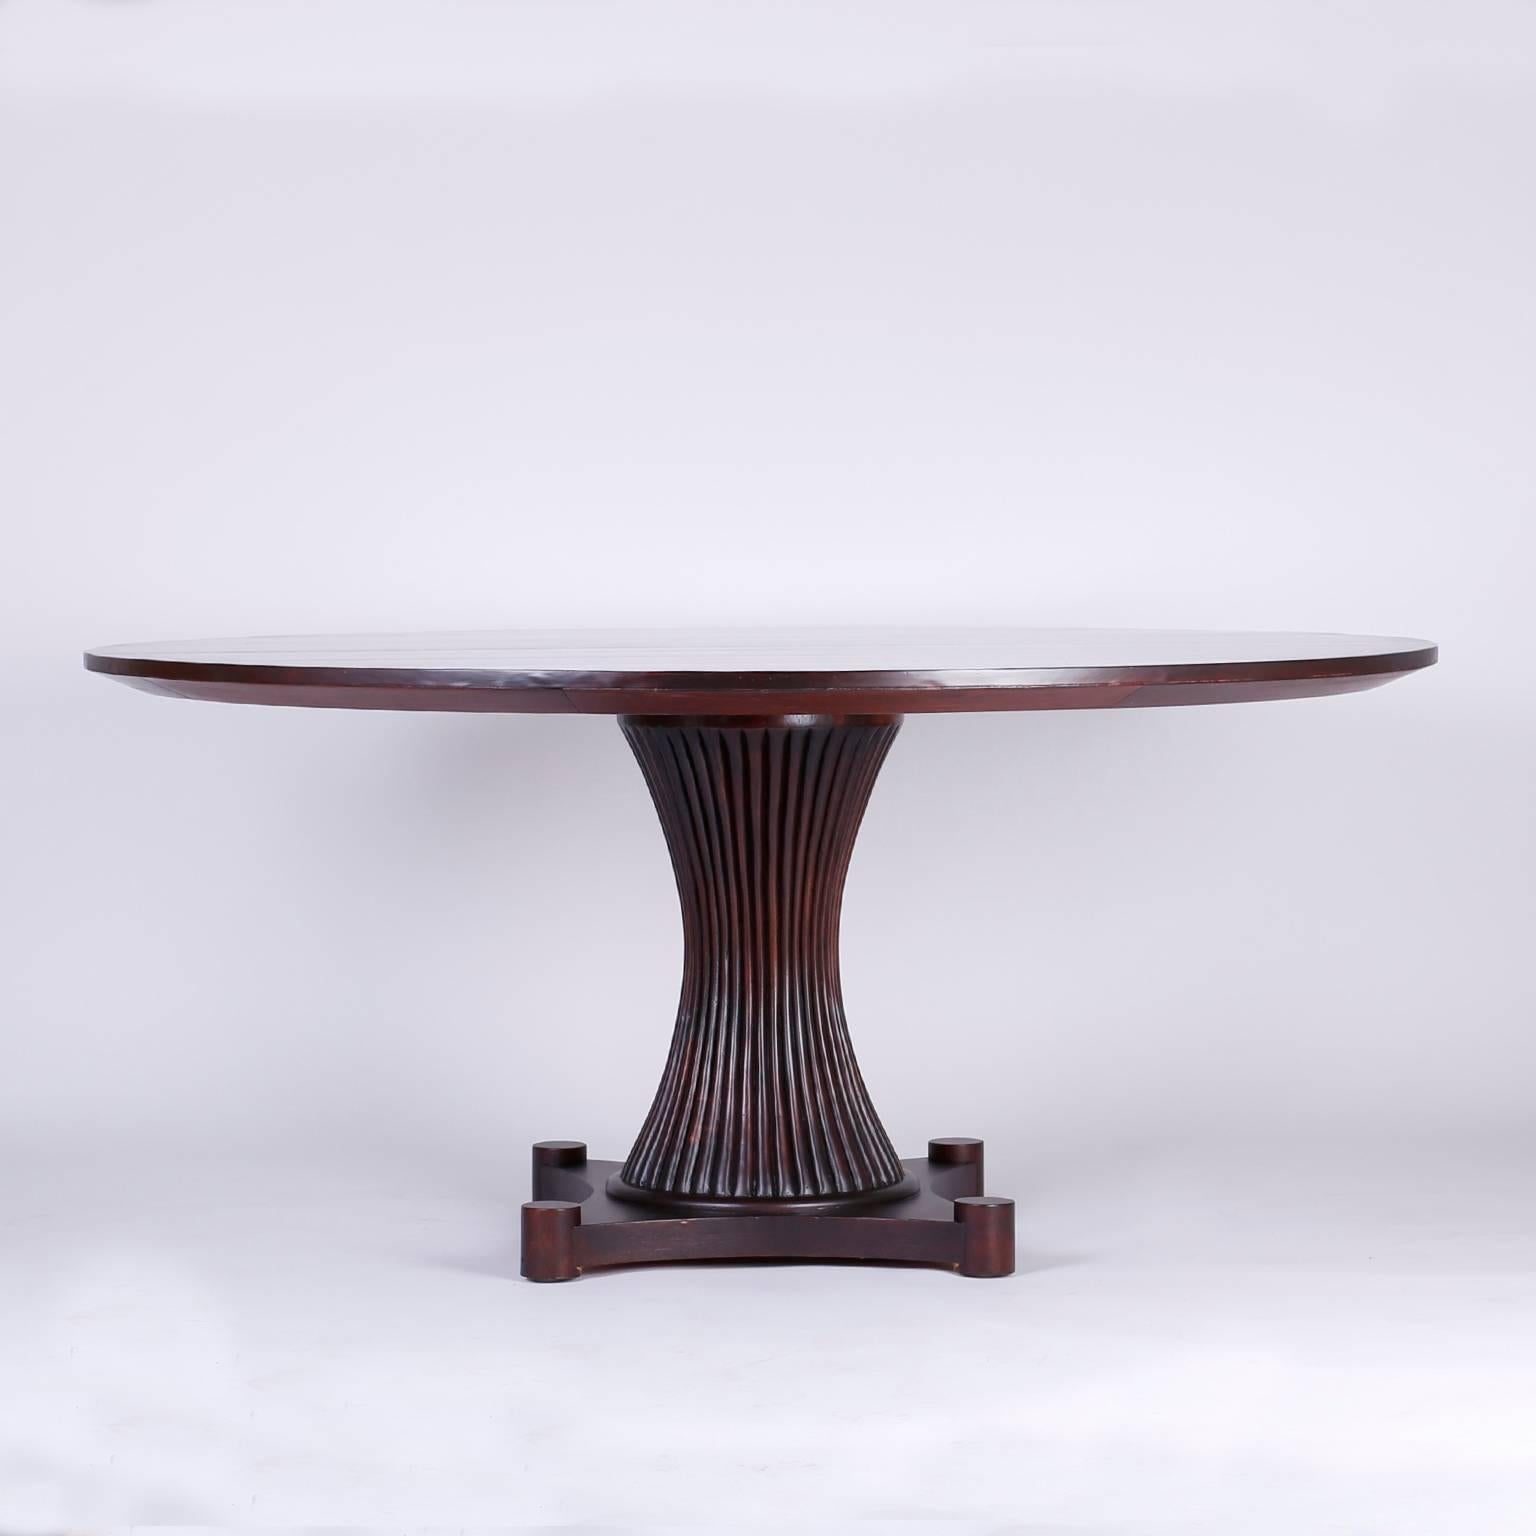 Sleek, midcentury mahogany table with a round top supported by a beaded hour glass shaped base over a stylized Stand on four disk feet. Signed Baker on a silver label.